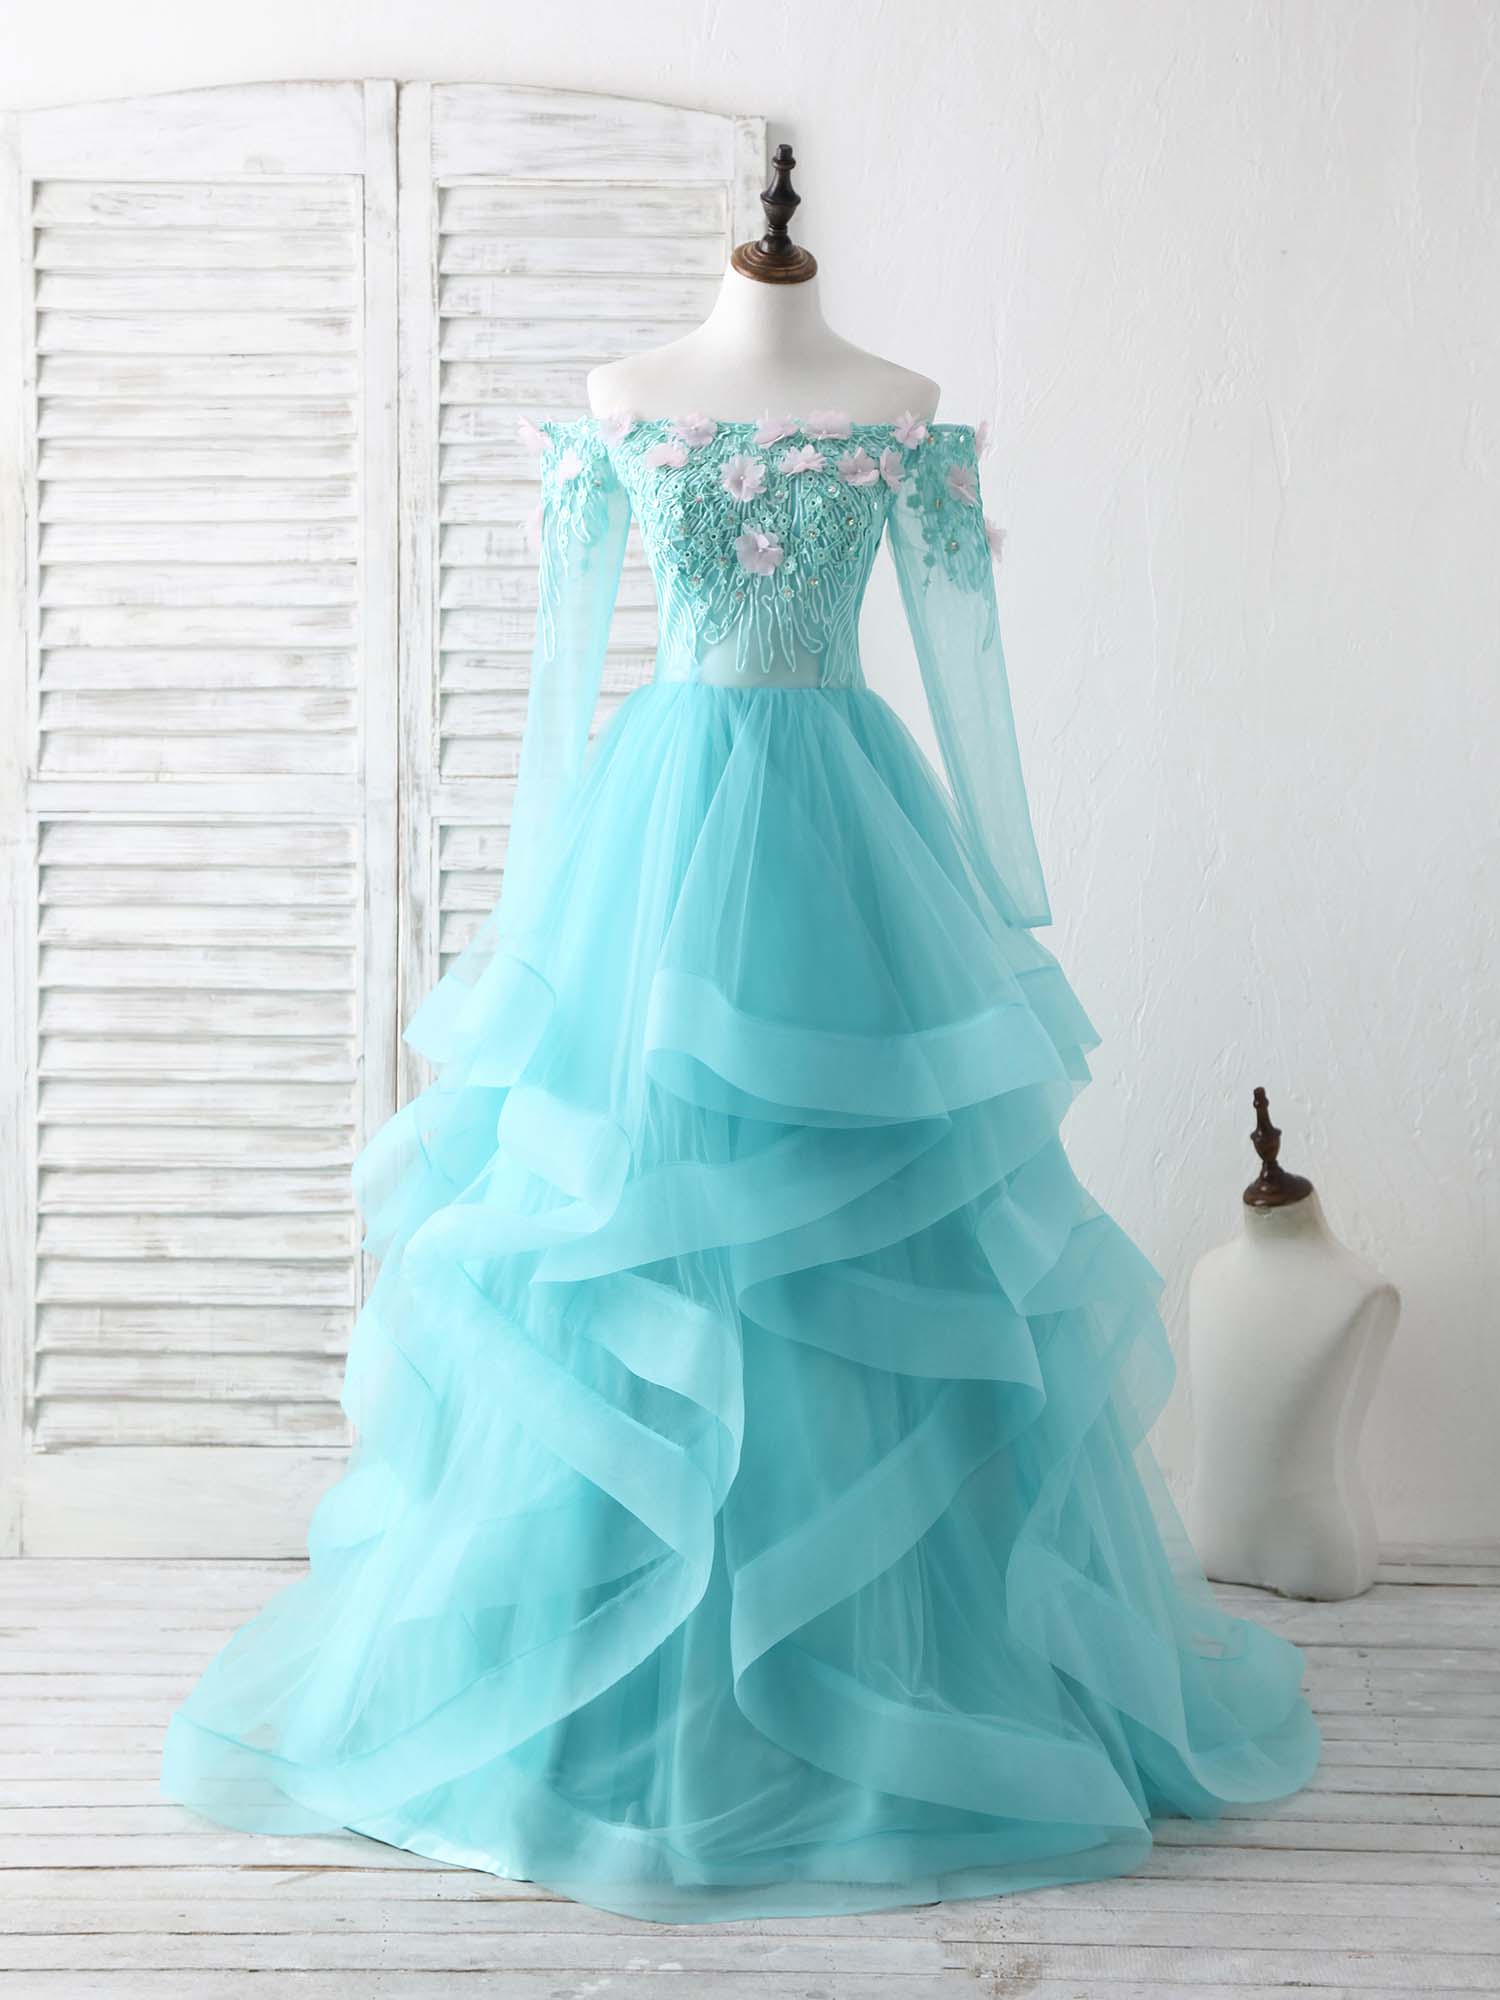 Green Tulle Lace Applique Long Prom Dress Outfits For Women Green Graduation Dresses